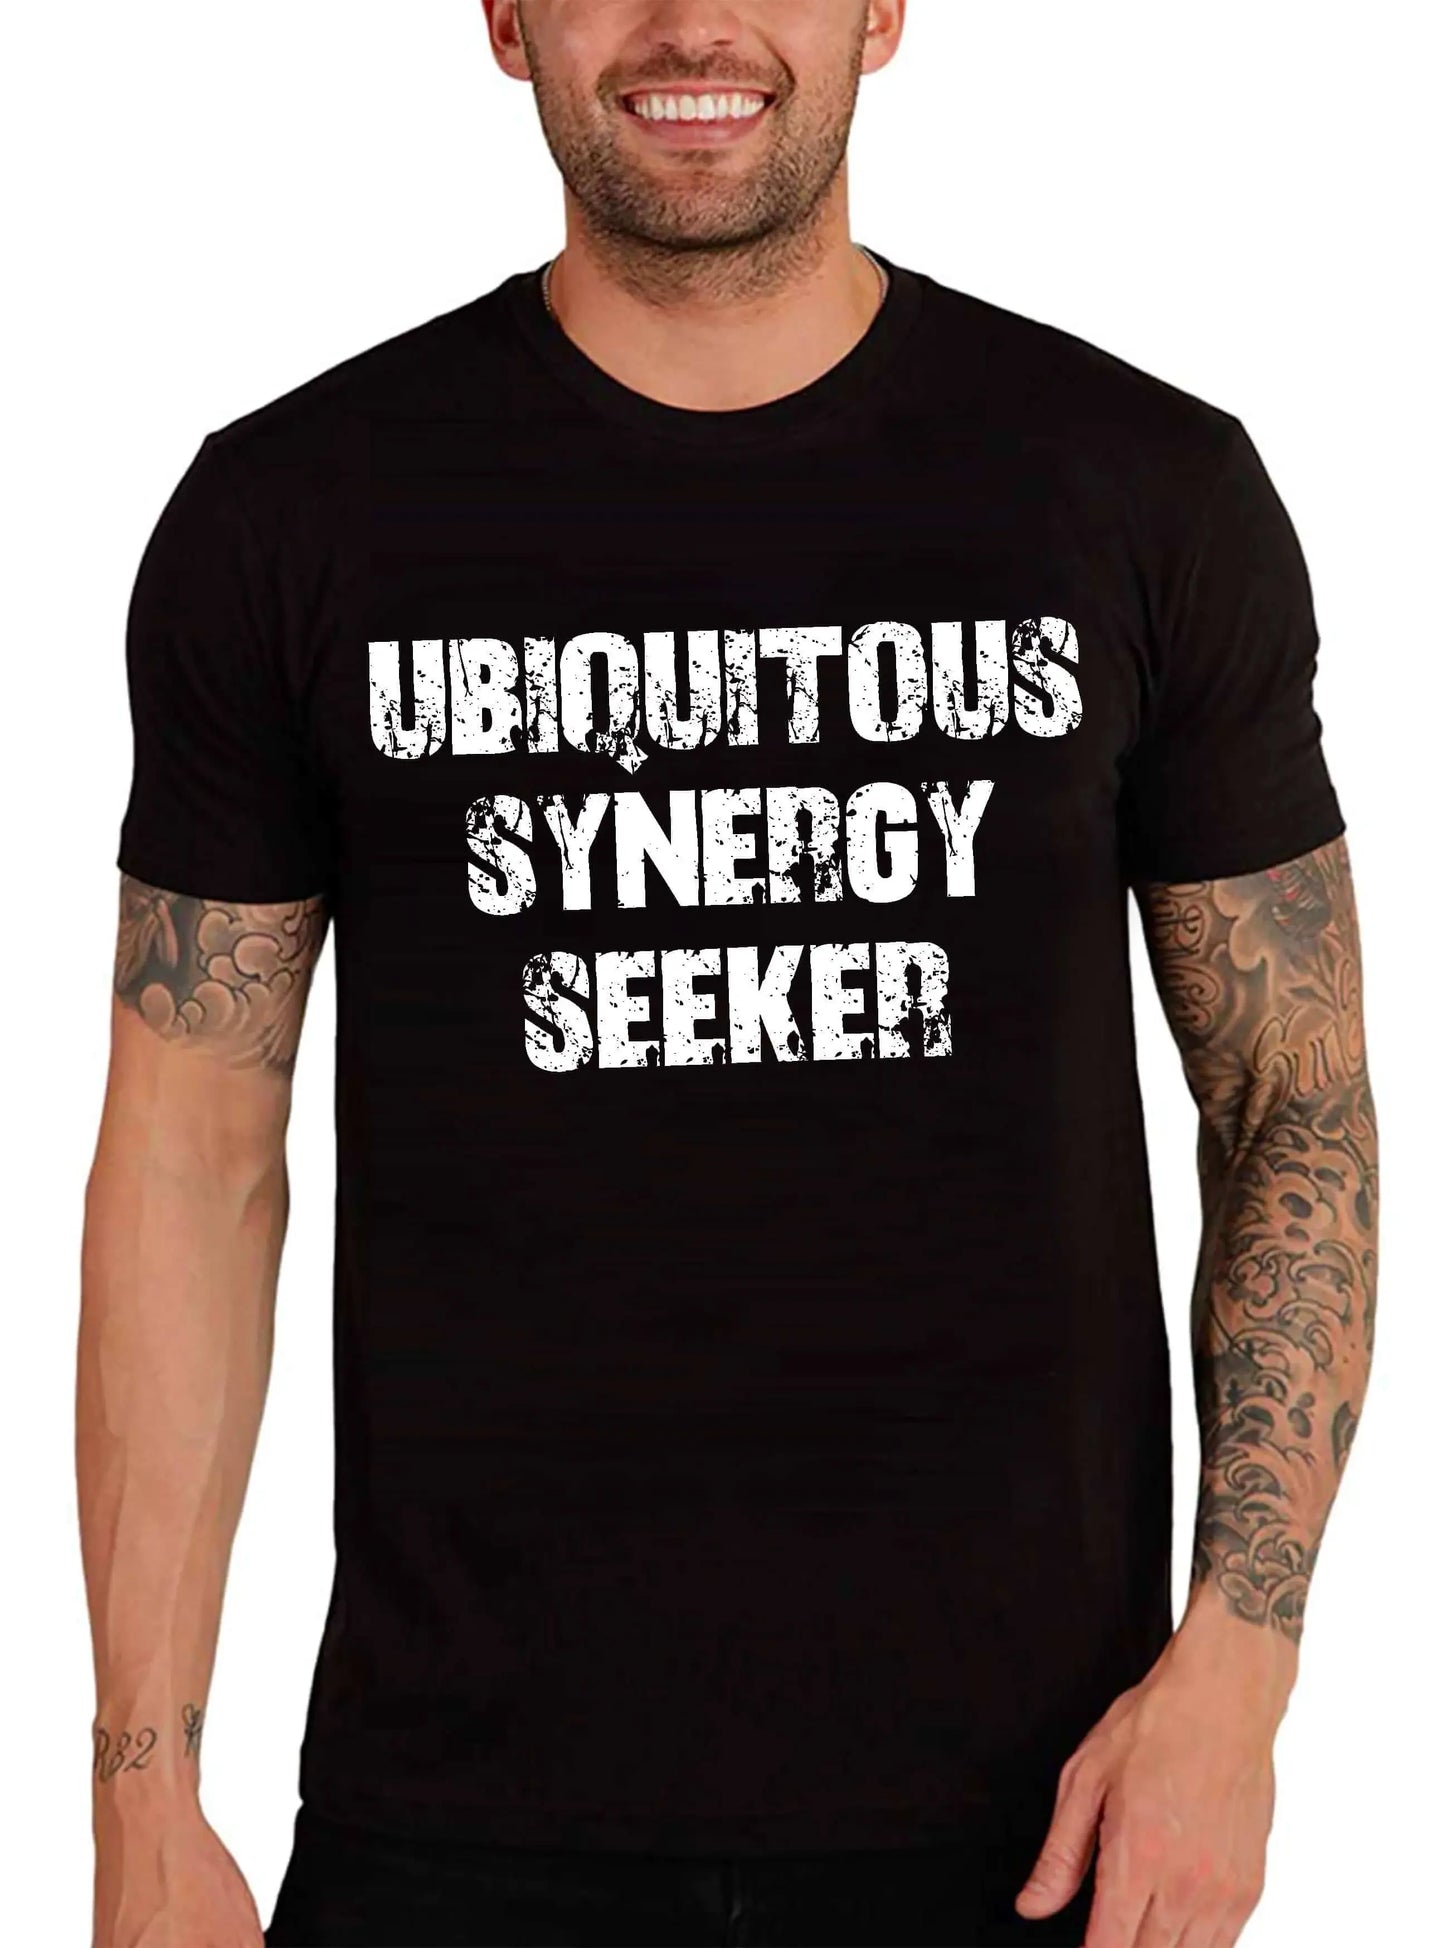 Men's Graphic T-Shirt Ubiquitous Synergy Seeker Eco-Friendly Limited Edition Short Sleeve Tee-Shirt Vintage Birthday Gift Novelty